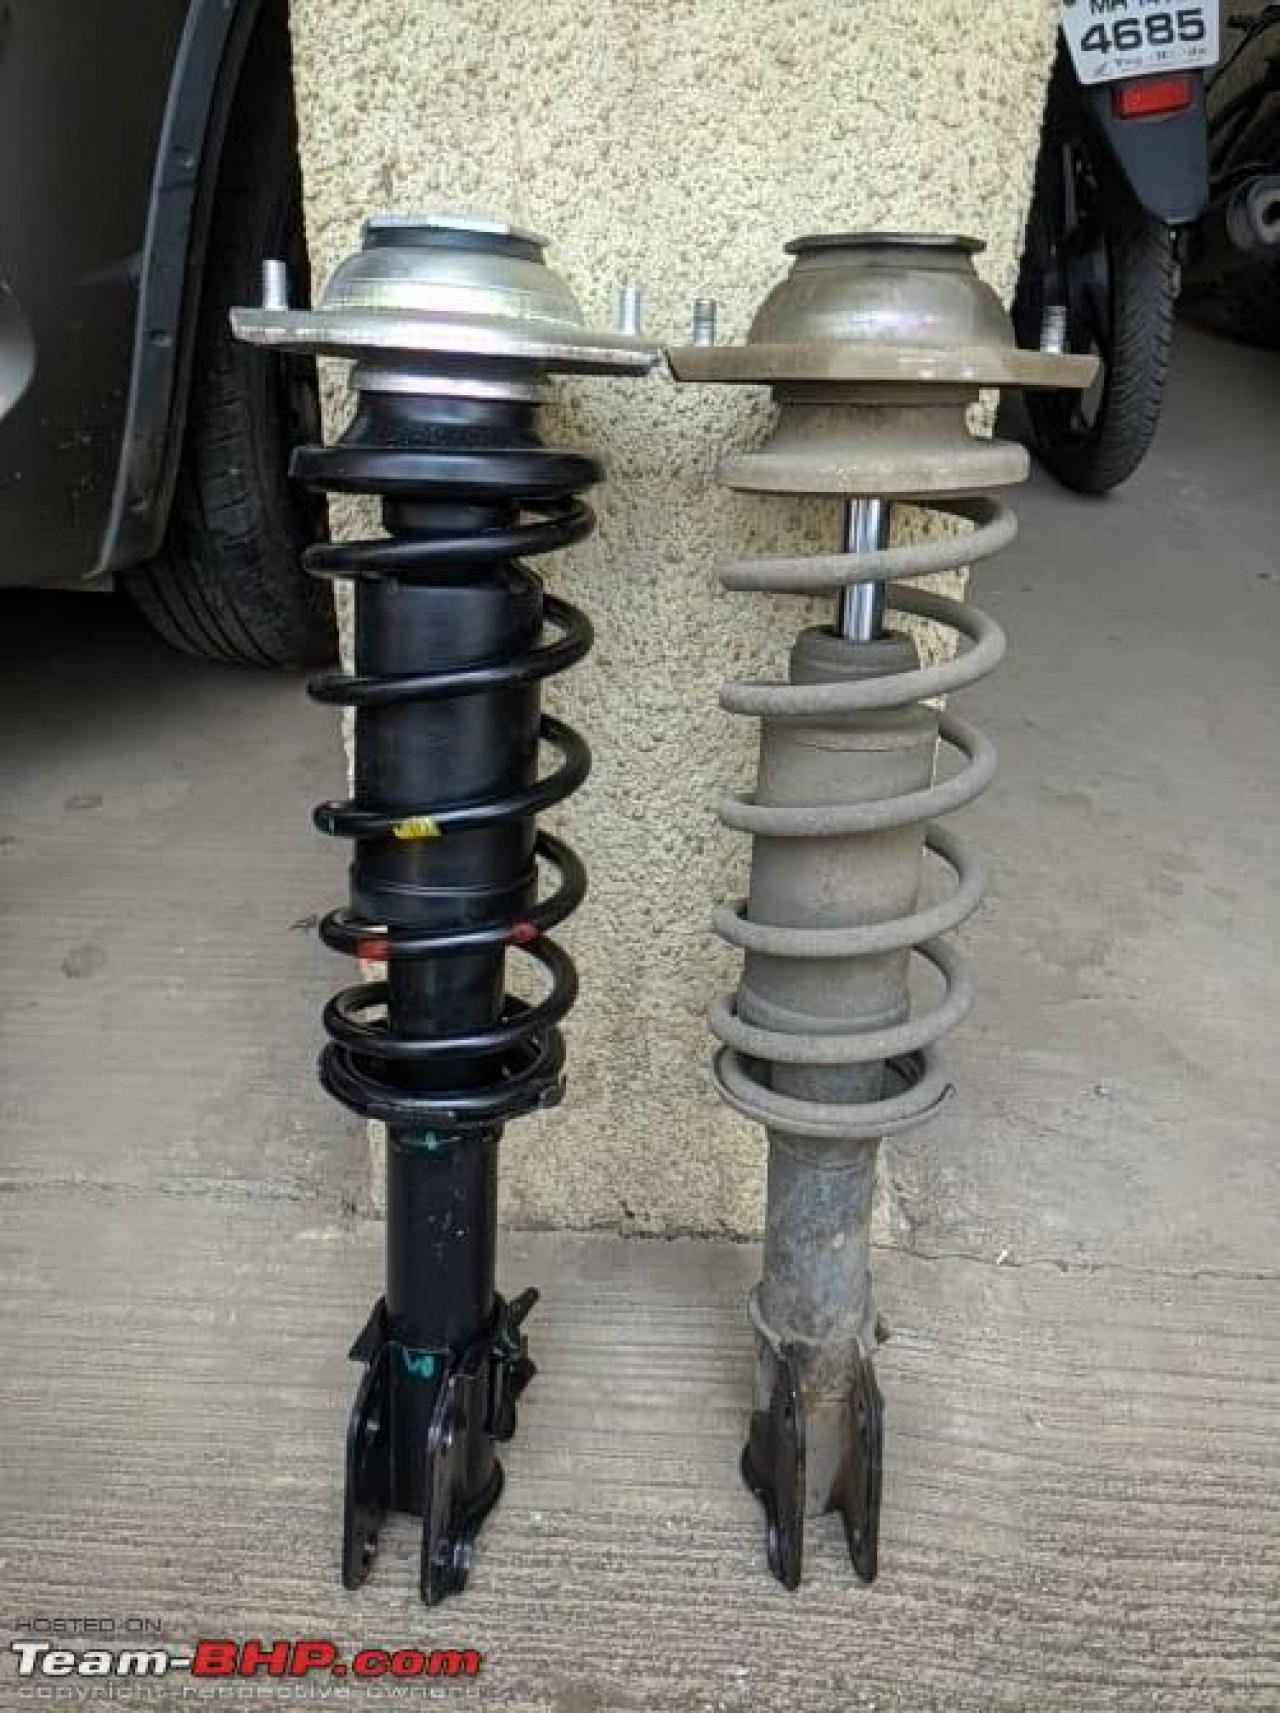 Replacing the front shock absorbers of my Maruti Alto by myself | Team-BHP